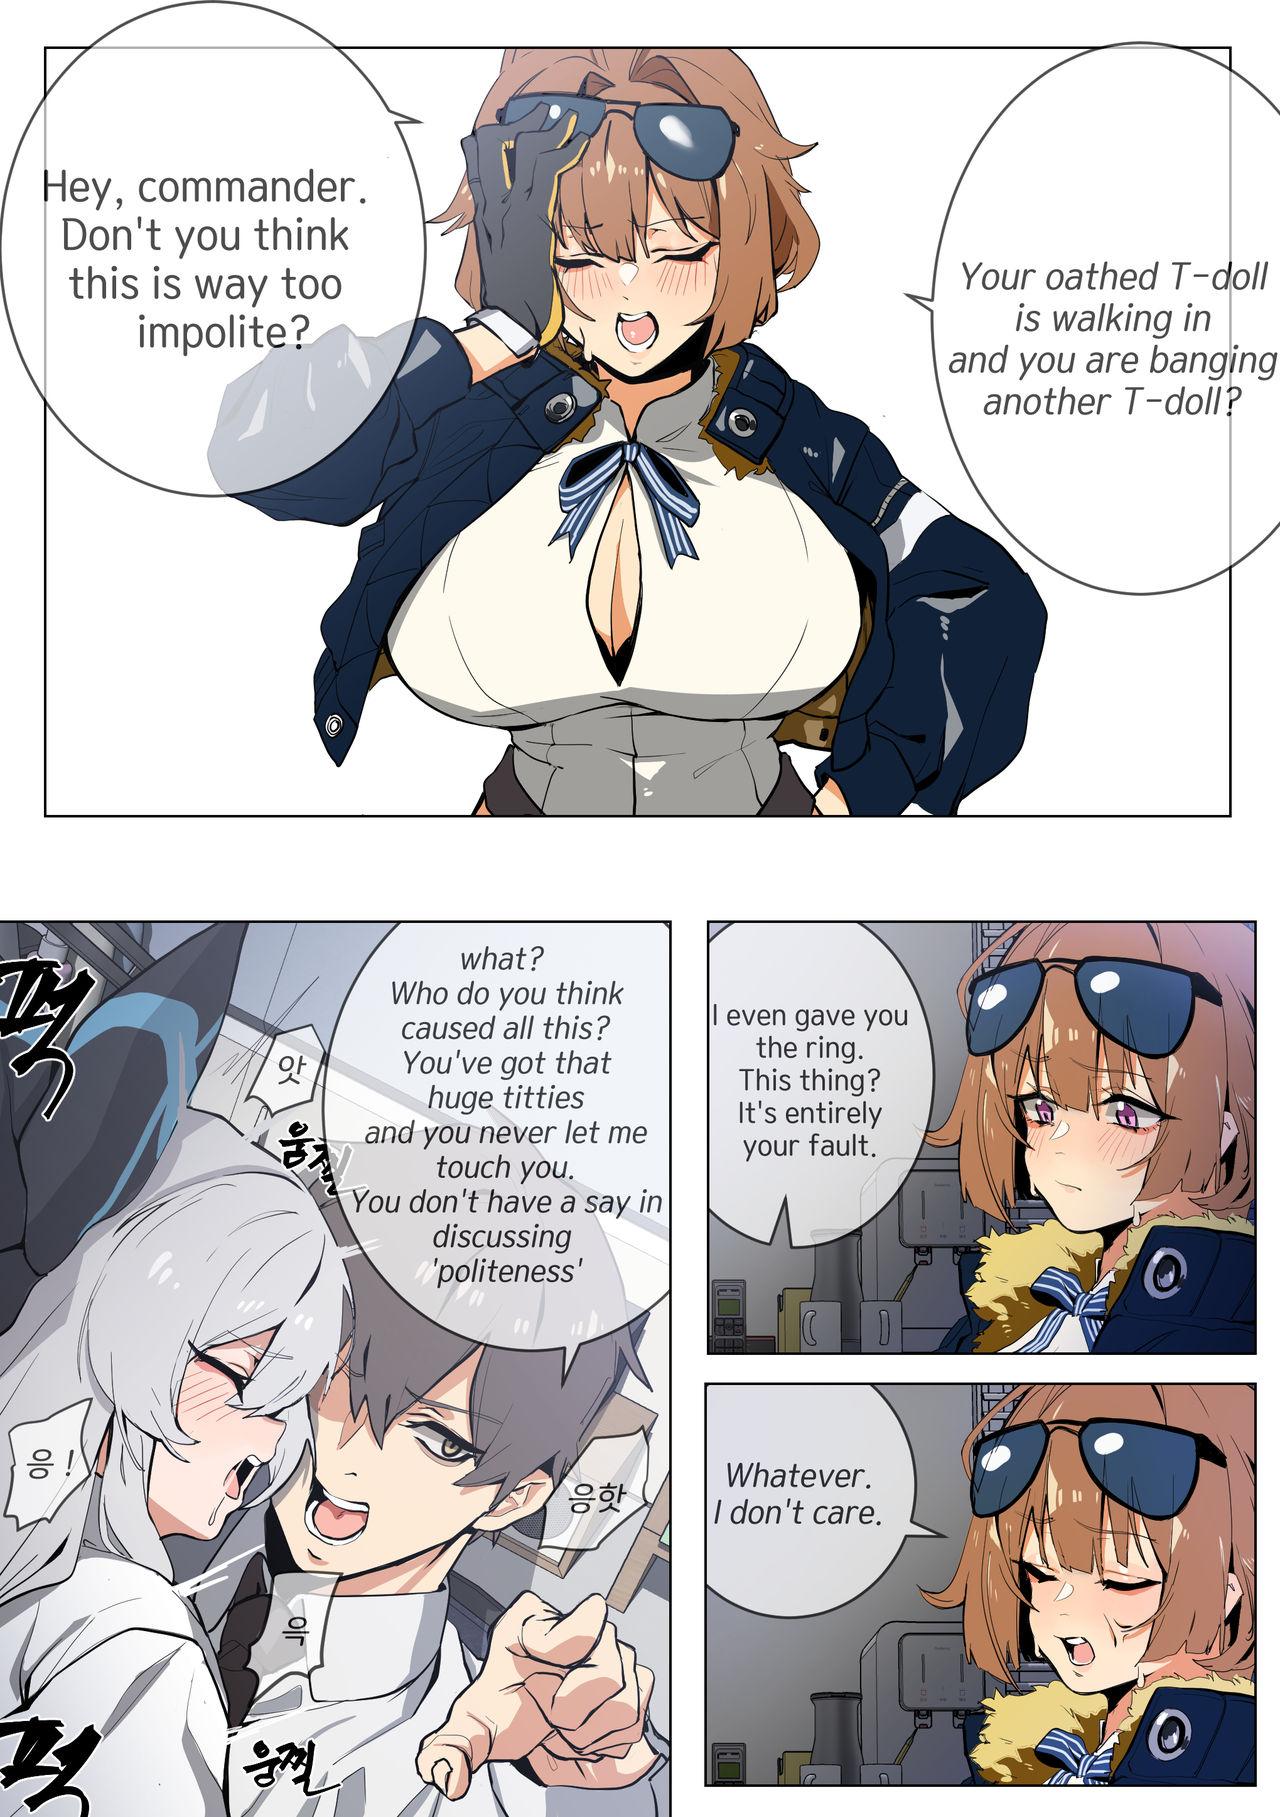 Wet Grizzly - Girls frontline Ethnic - Page 3